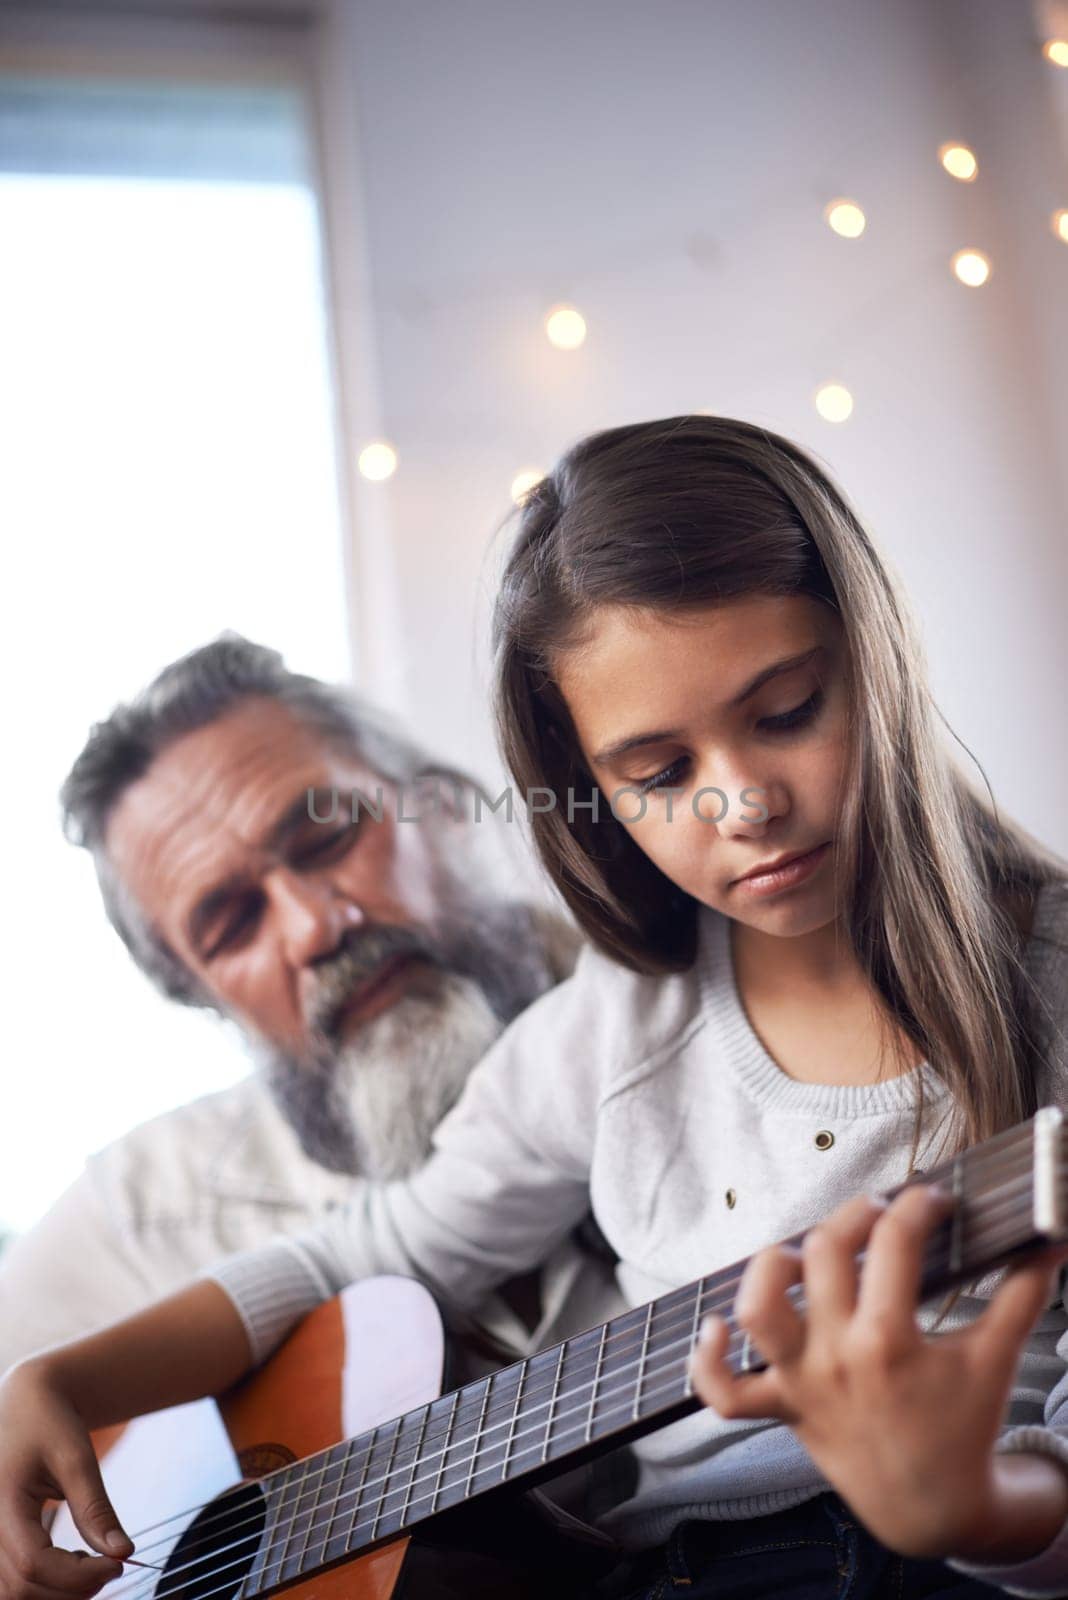 Girl with grandfather, guitar and learning to play, music education and help with creative development. Musician, art and old man helping female kid learn focus and skill on musical instrument by YuriArcurs